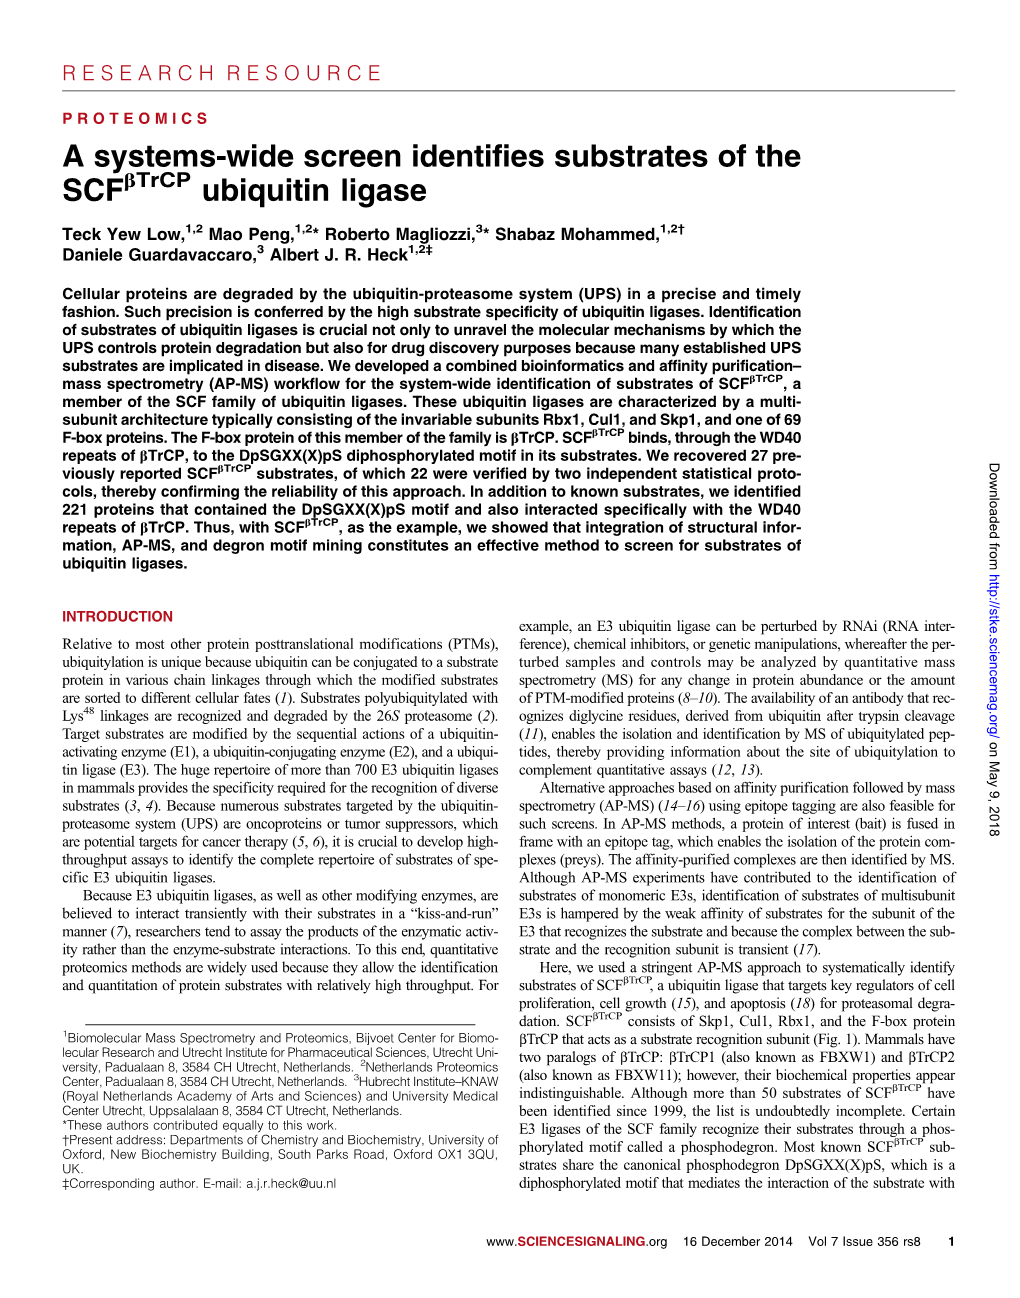 A Systems-Wide Screen Identifies Substrates of the SCF Ubiquitin Ligase